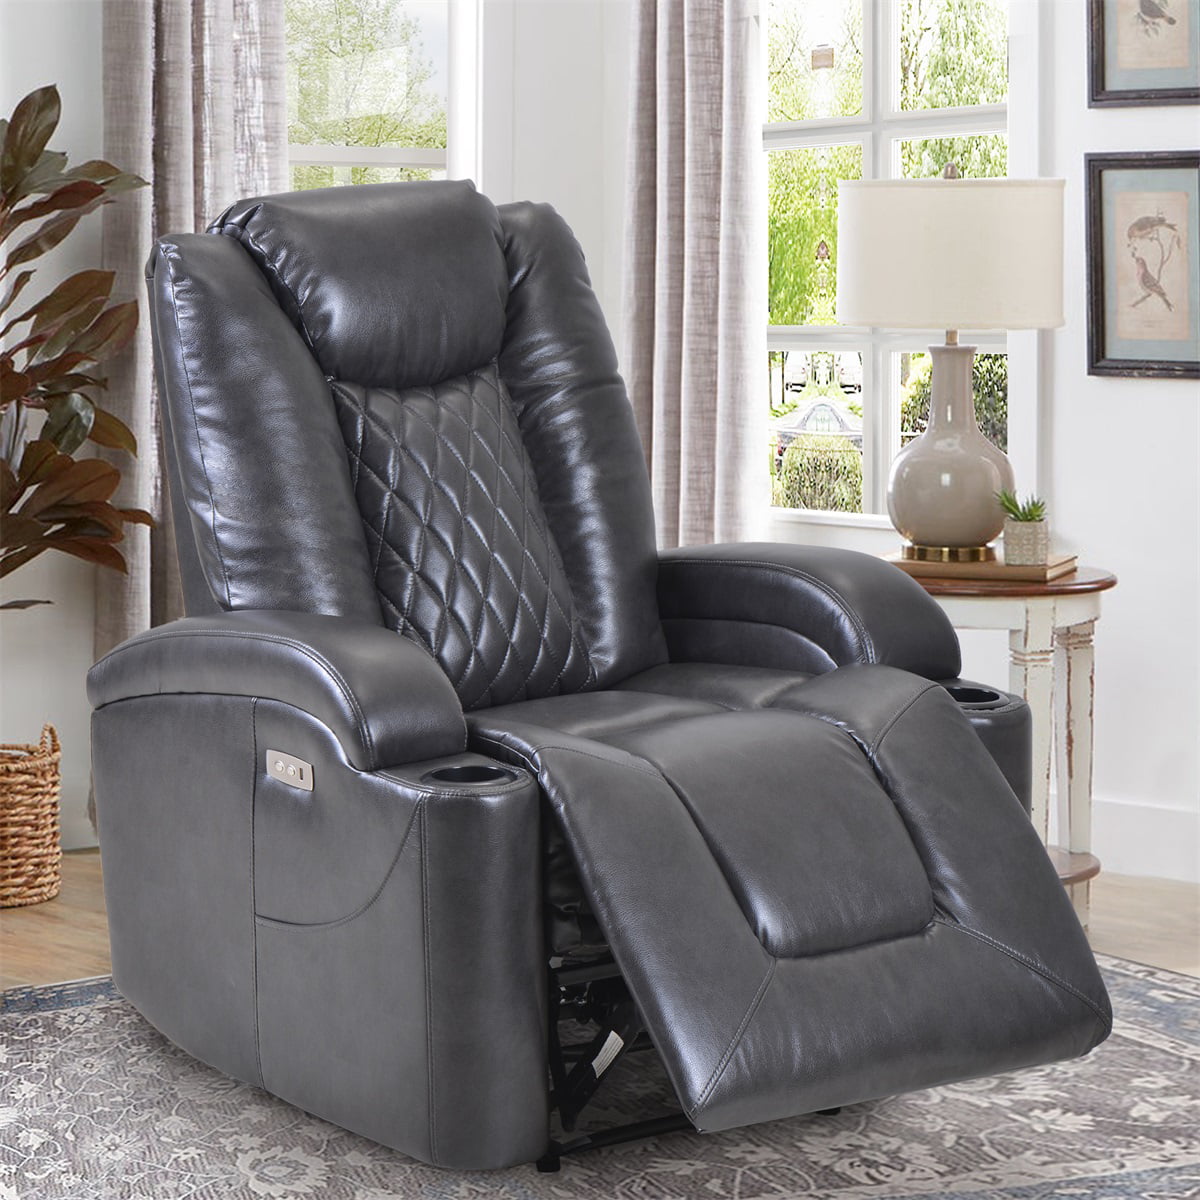 Topcobe Massage Power Lift Chair, Electric Recliner Chair